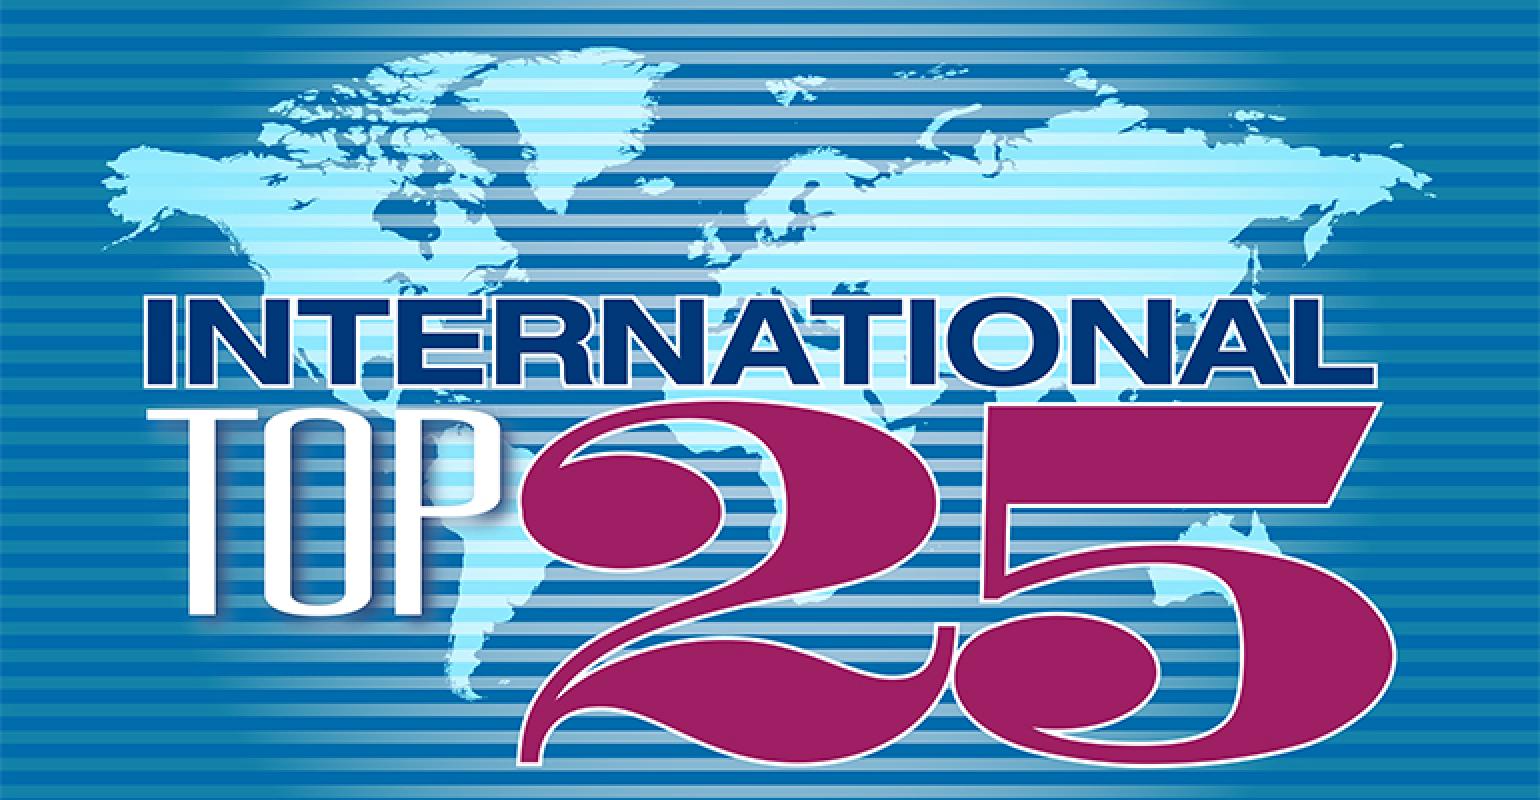 Top 25: 5 key insights on global chains | Nation's Restaurant News